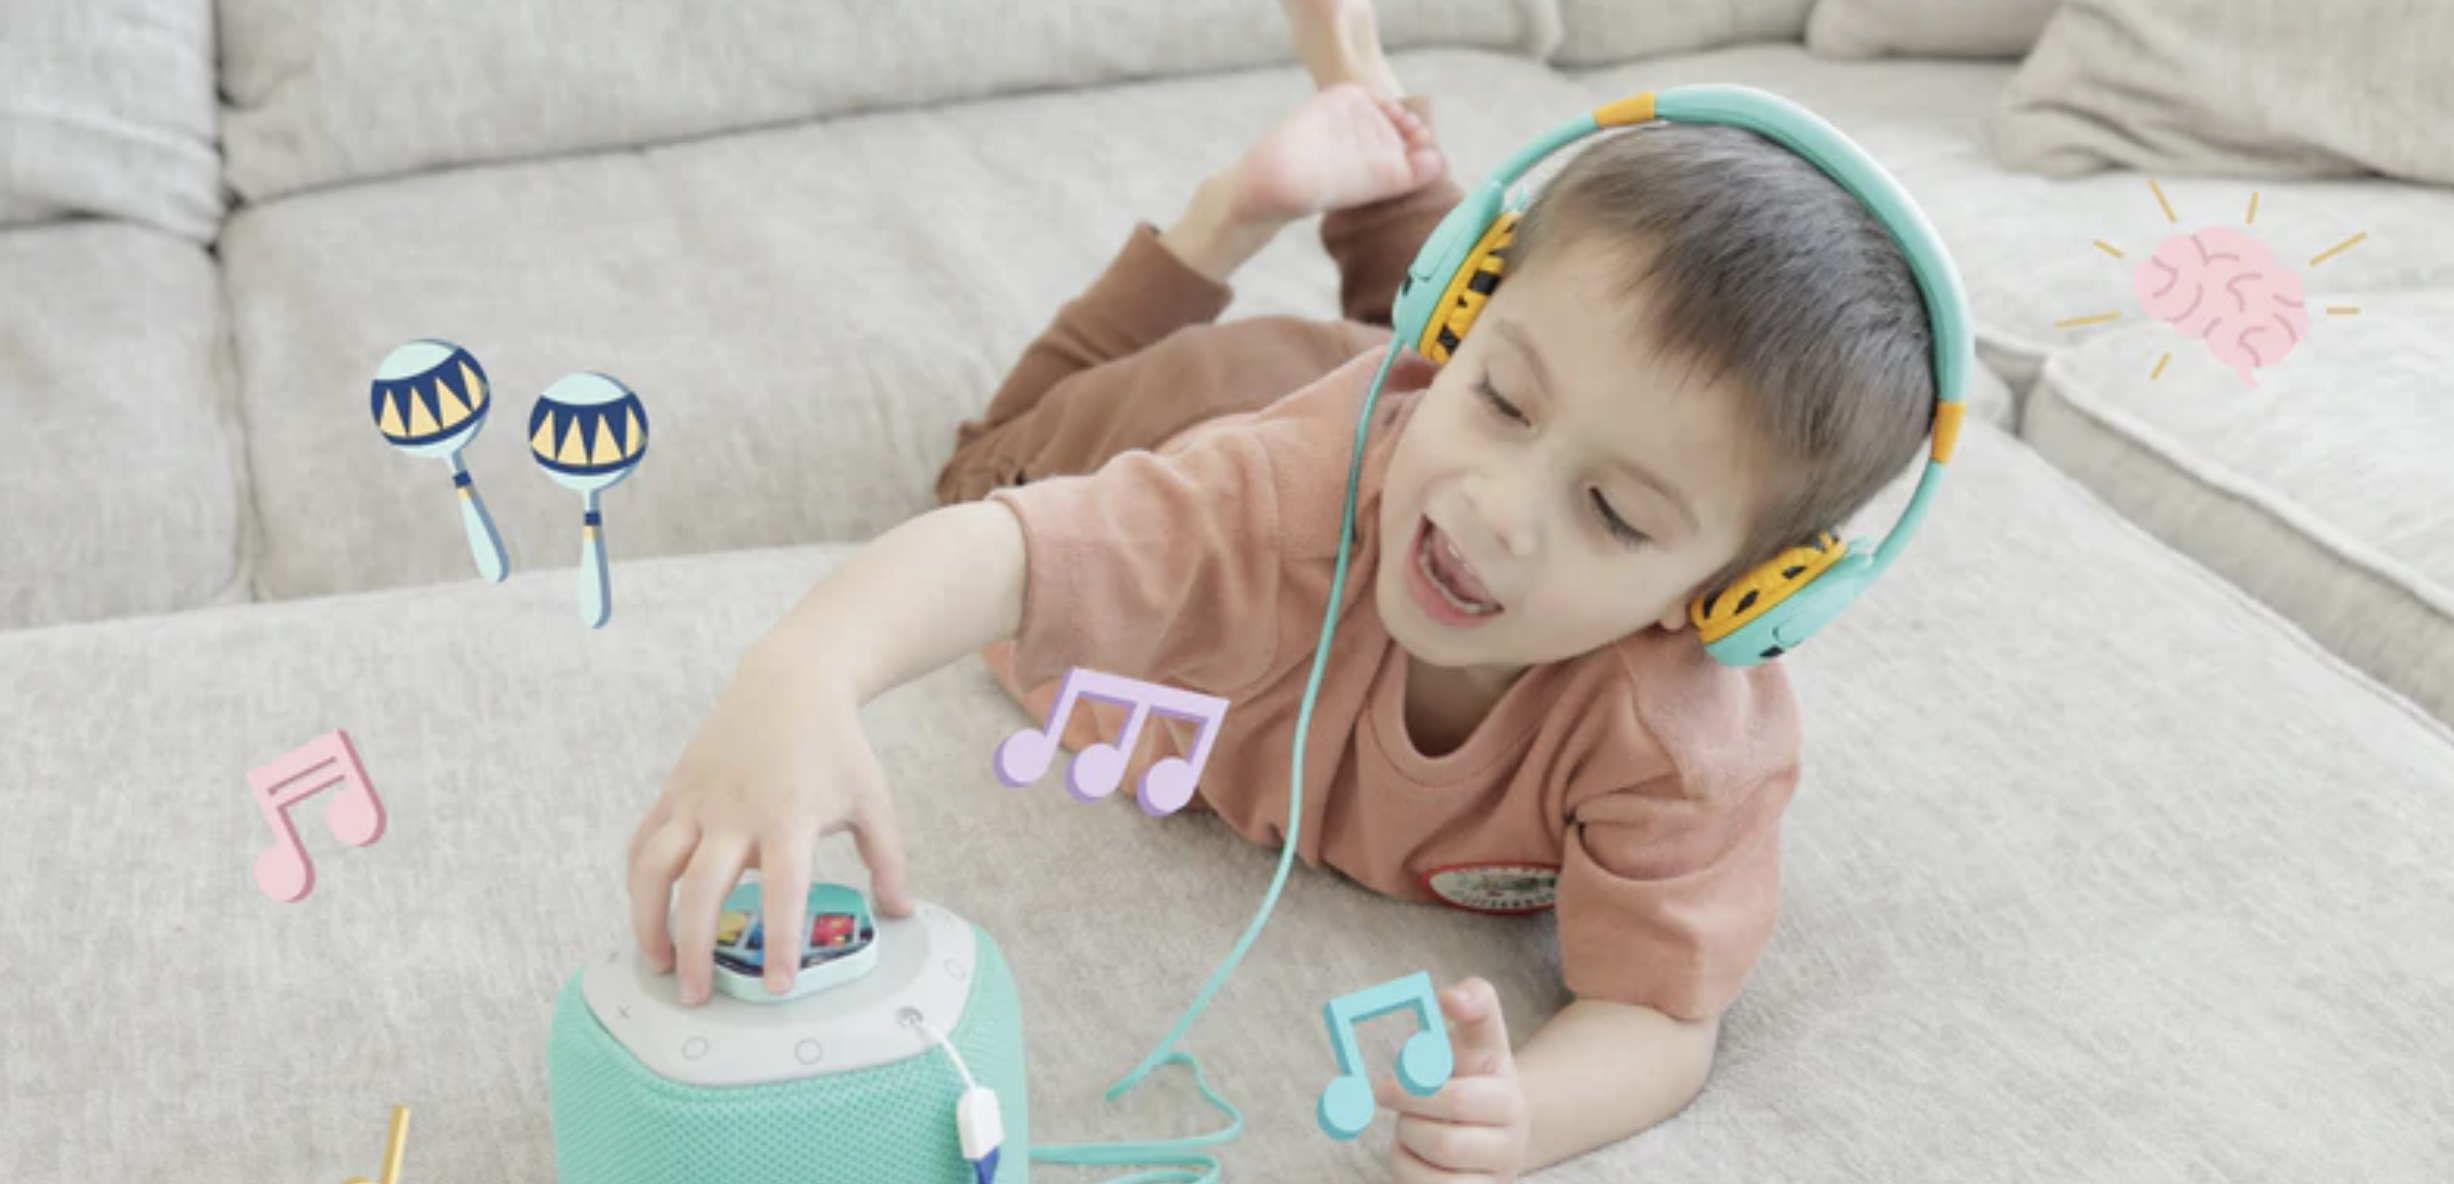 An image of a child playing with a Storypod